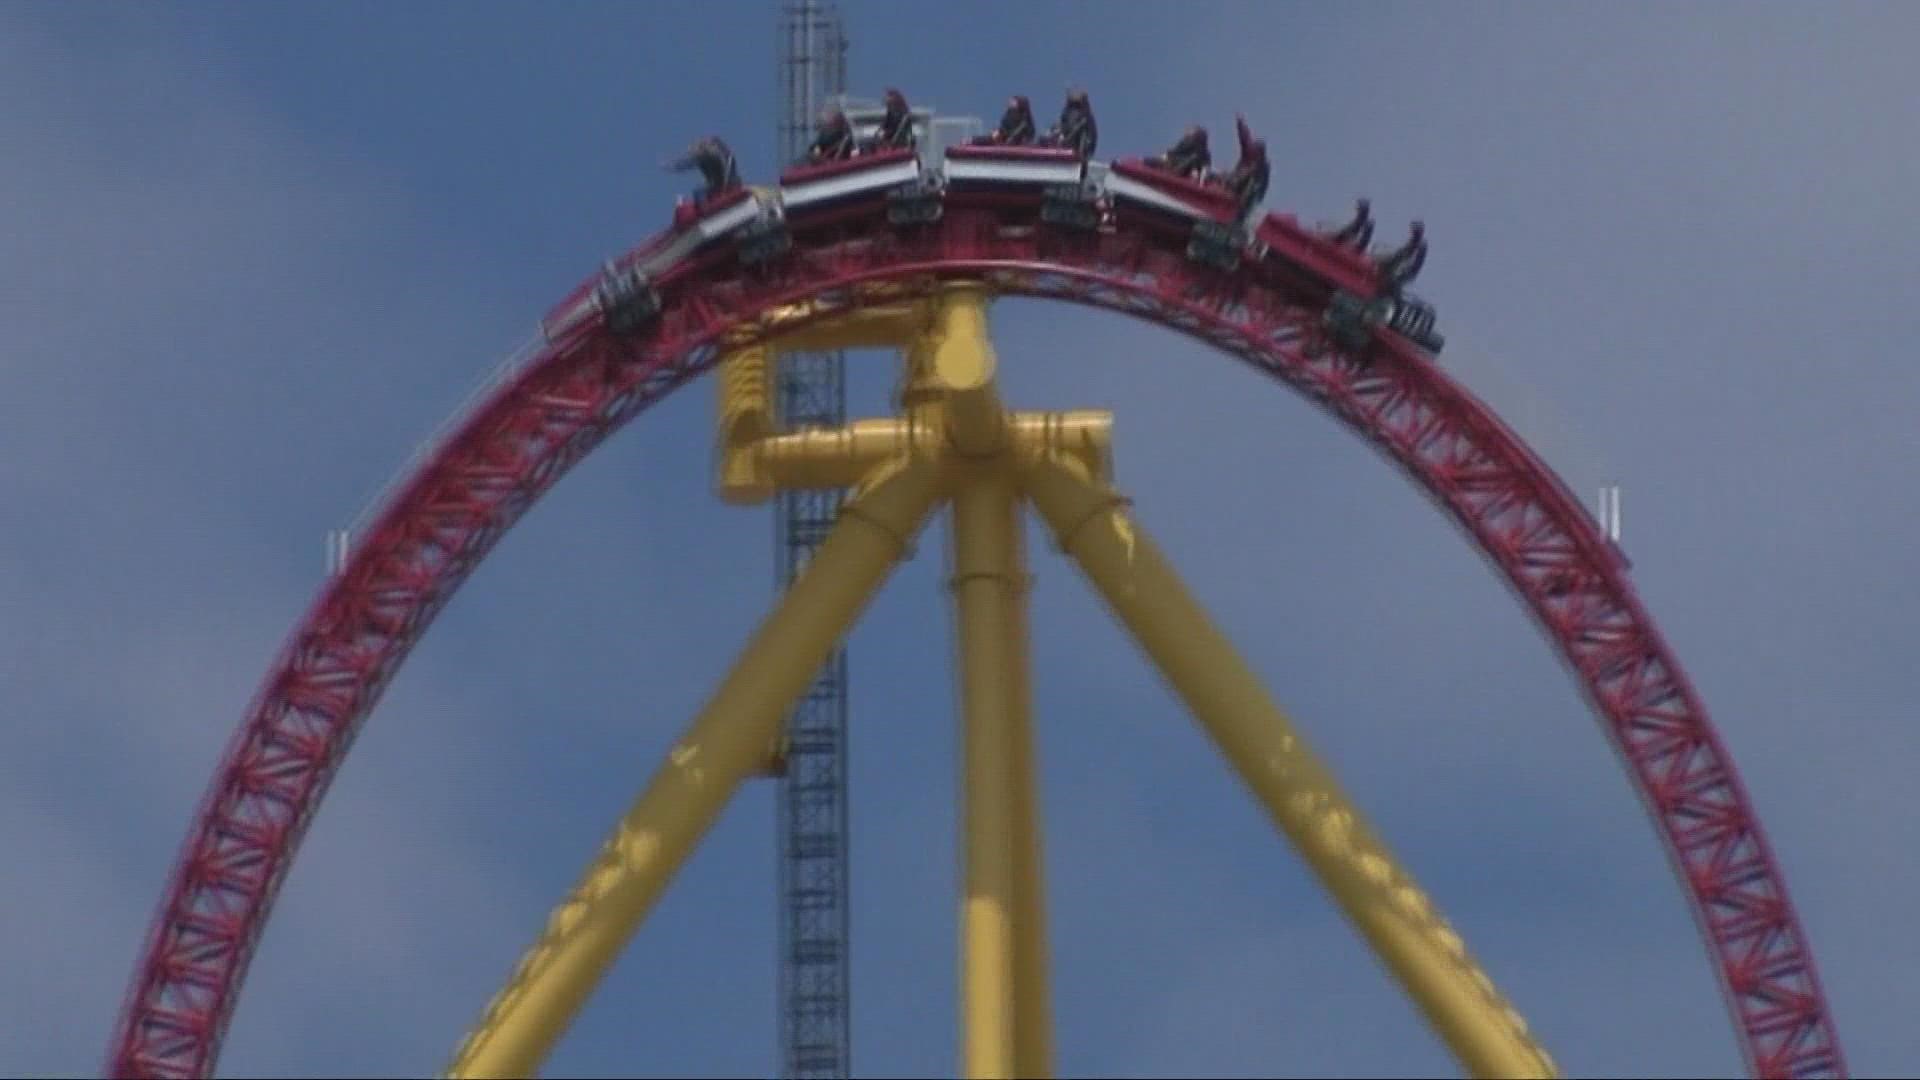 'After 19 seasons in operation with 18 million riders experiencing the world’s first strata coaster, Top Thrill Dragster, as you know it, is being retired.'